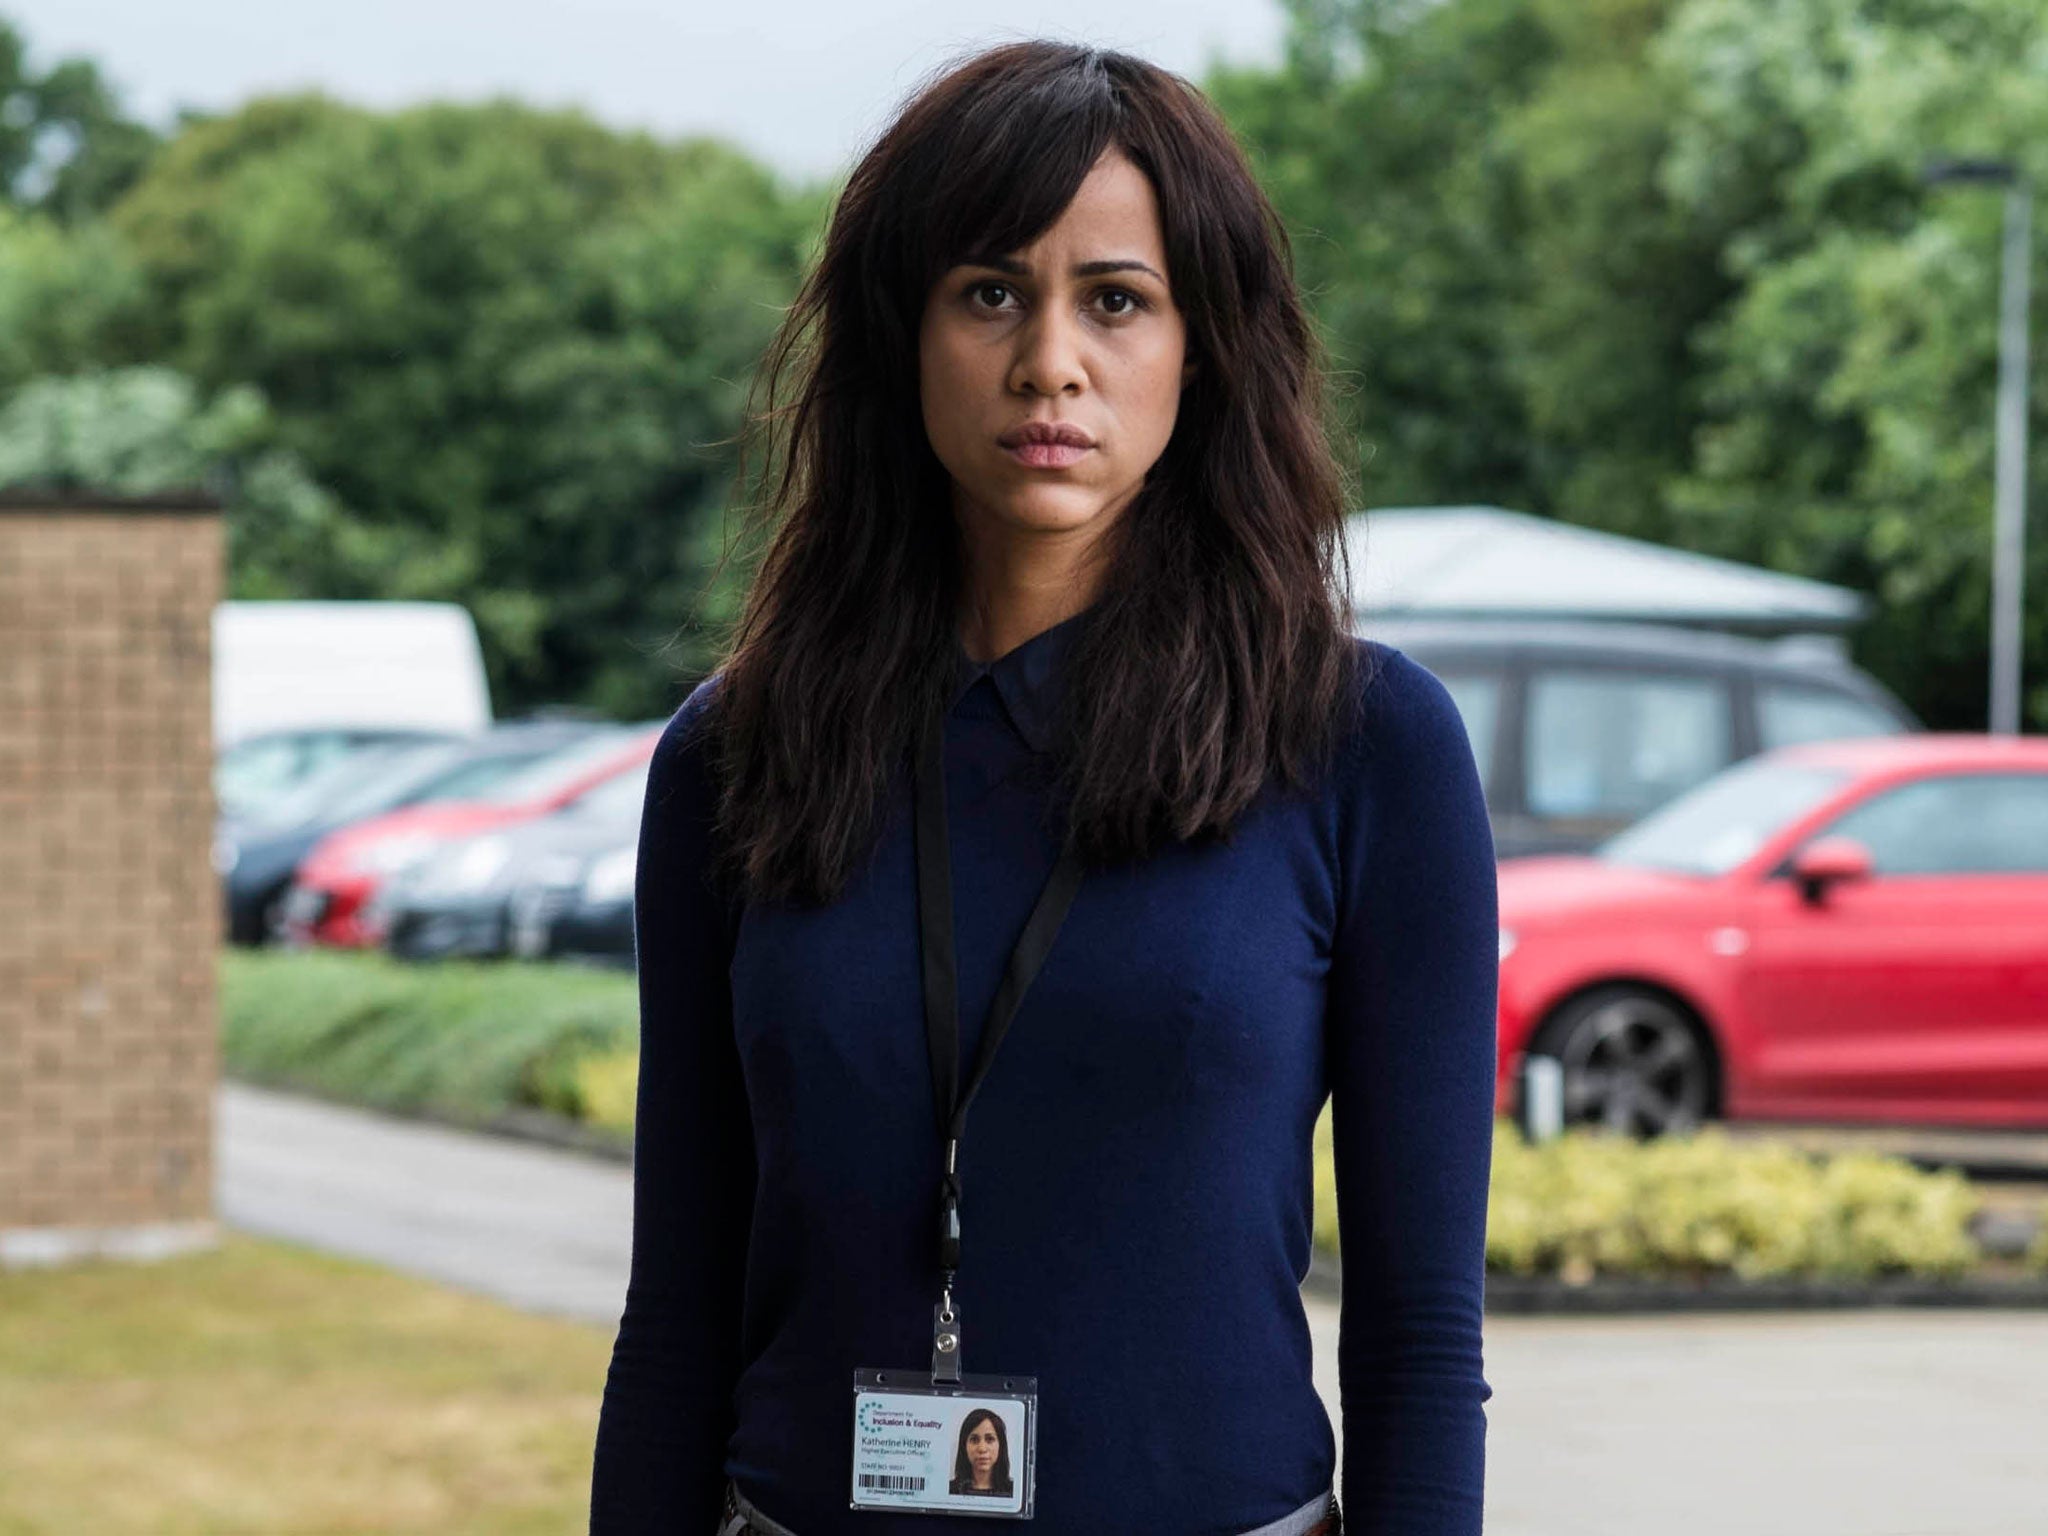 Zawe Ashton as Katherine in Channel 4's new comedy drama 'Not Safe for Work'